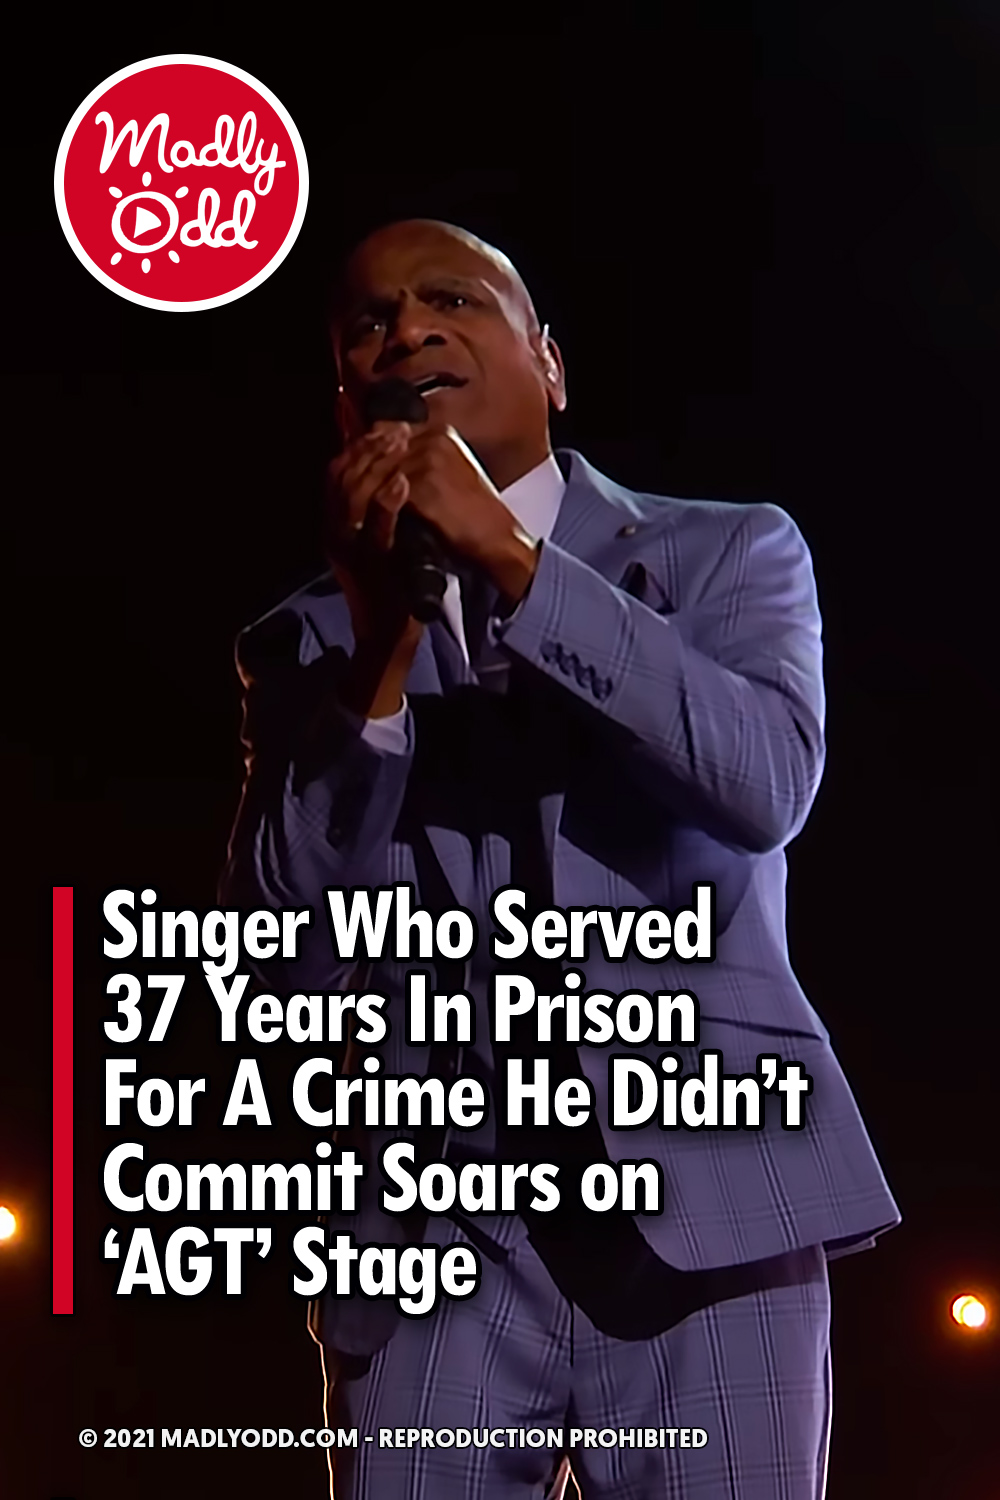 Singer Who Served 37 Years In Prison For A Crime He Didn’t Commit Soars on ‘AGT’ Stage